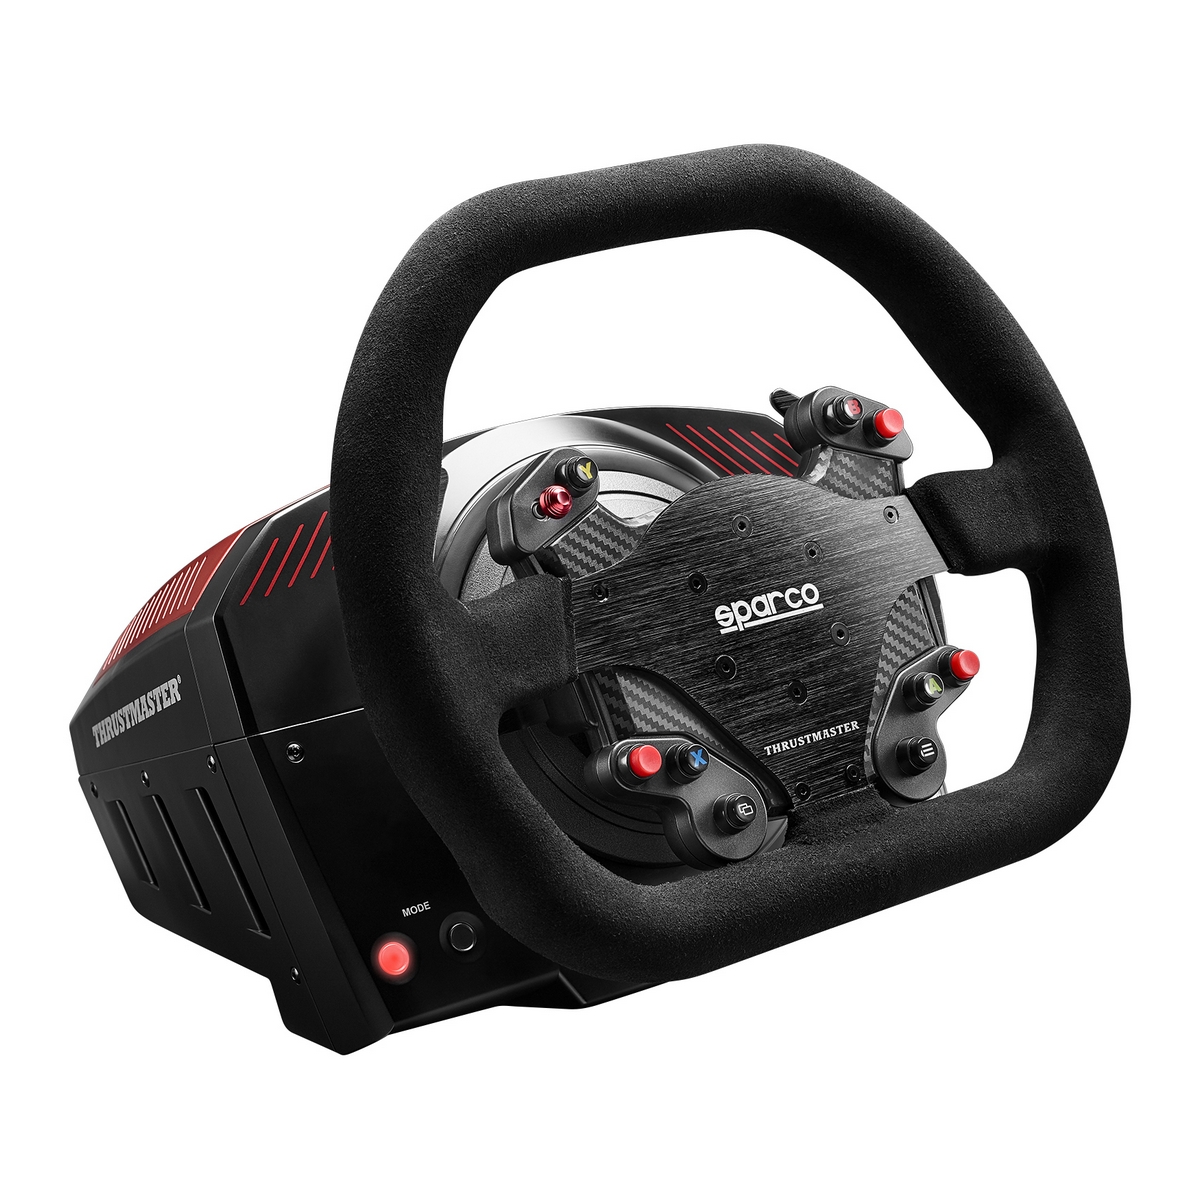 Thrustmaster - Thrustmaster TS-XW Racer Sparco P310 Competition Mod Racing Wheel and Pedals (PC/XBOX ONE 4468009)